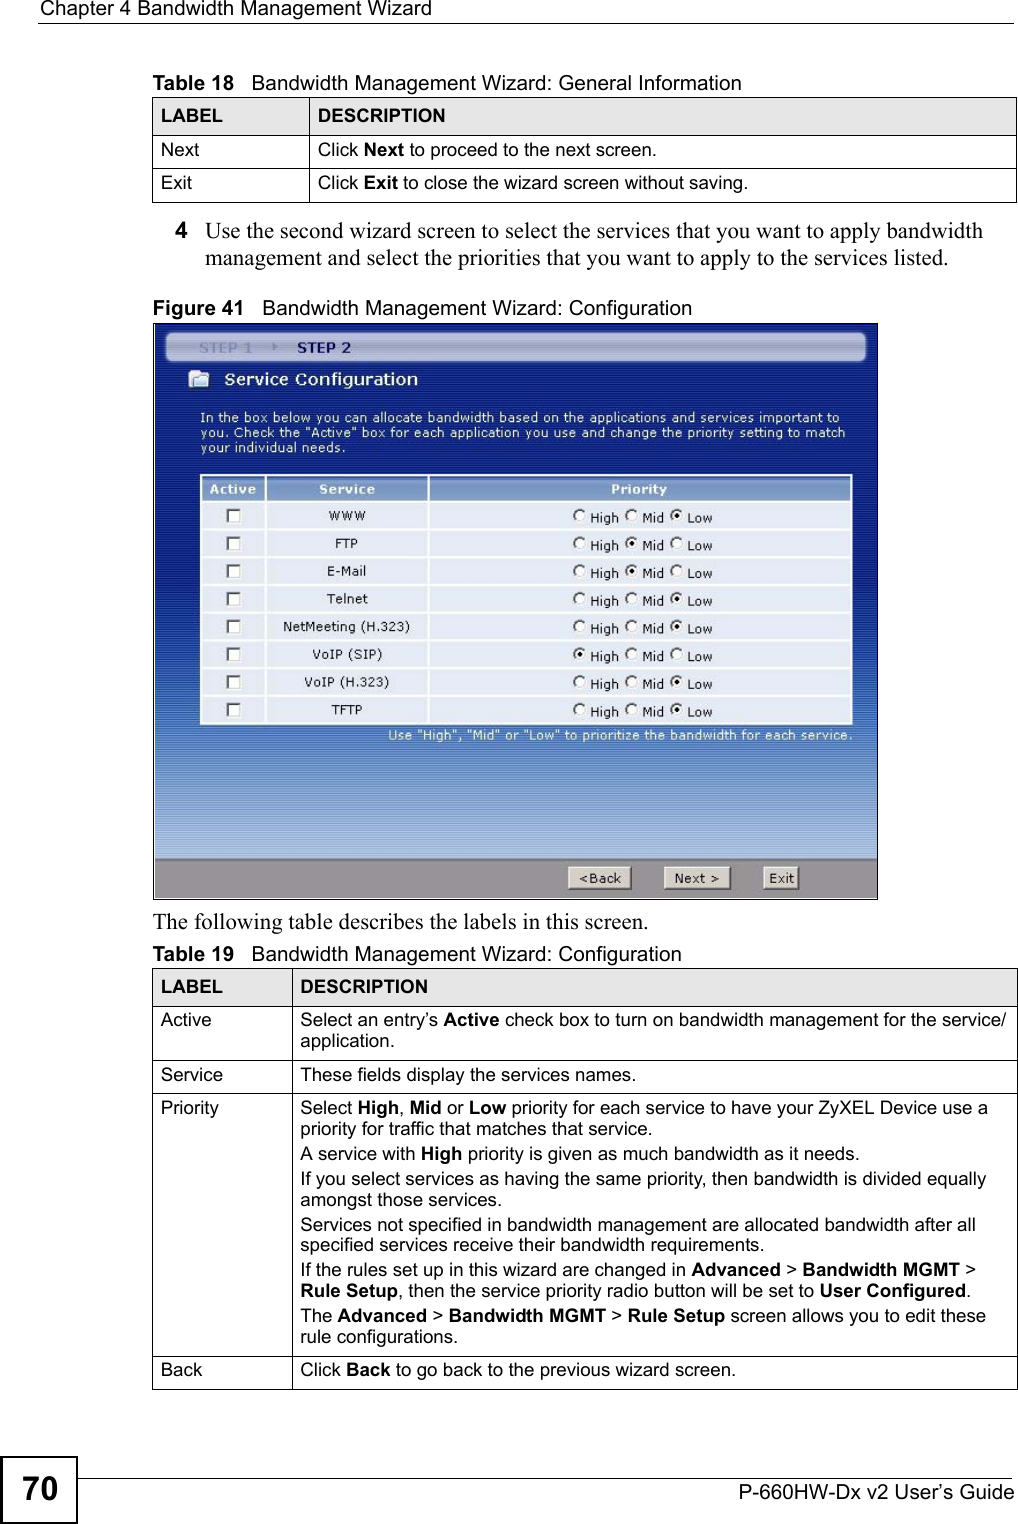 Chapter 4 Bandwidth Management WizardP-660HW-Dx v2 User’s Guide704Use the second wizard screen to select the services that you want to apply bandwidth management and select the priorities that you want to apply to the services listed.Figure 41   Bandwidth Management Wizard: ConfigurationThe following table describes the labels in this screen.Next Click Next to proceed to the next screen. Exit Click Exit to close the wizard screen without saving.Table 19   Bandwidth Management Wizard: ConfigurationLABEL DESCRIPTIONActive Select an entry’s Active check box to turn on bandwidth management for the service/application.Service These fields display the services names.Priority Select High, Mid or Low priority for each service to have your ZyXEL Device use a priority for traffic that matches that service. A service with High priority is given as much bandwidth as it needs. If you select services as having the same priority, then bandwidth is divided equally amongst those services. Services not specified in bandwidth management are allocated bandwidth after all specified services receive their bandwidth requirements.If the rules set up in this wizard are changed in Advanced &gt; Bandwidth MGMT &gt; Rule Setup, then the service priority radio button will be set to User Configured.The Advanced &gt; Bandwidth MGMT &gt; Rule Setup screen allows you to edit these rule configurations.Back Click Back to go back to the previous wizard screen.Table 18   Bandwidth Management Wizard: General InformationLABEL DESCRIPTION